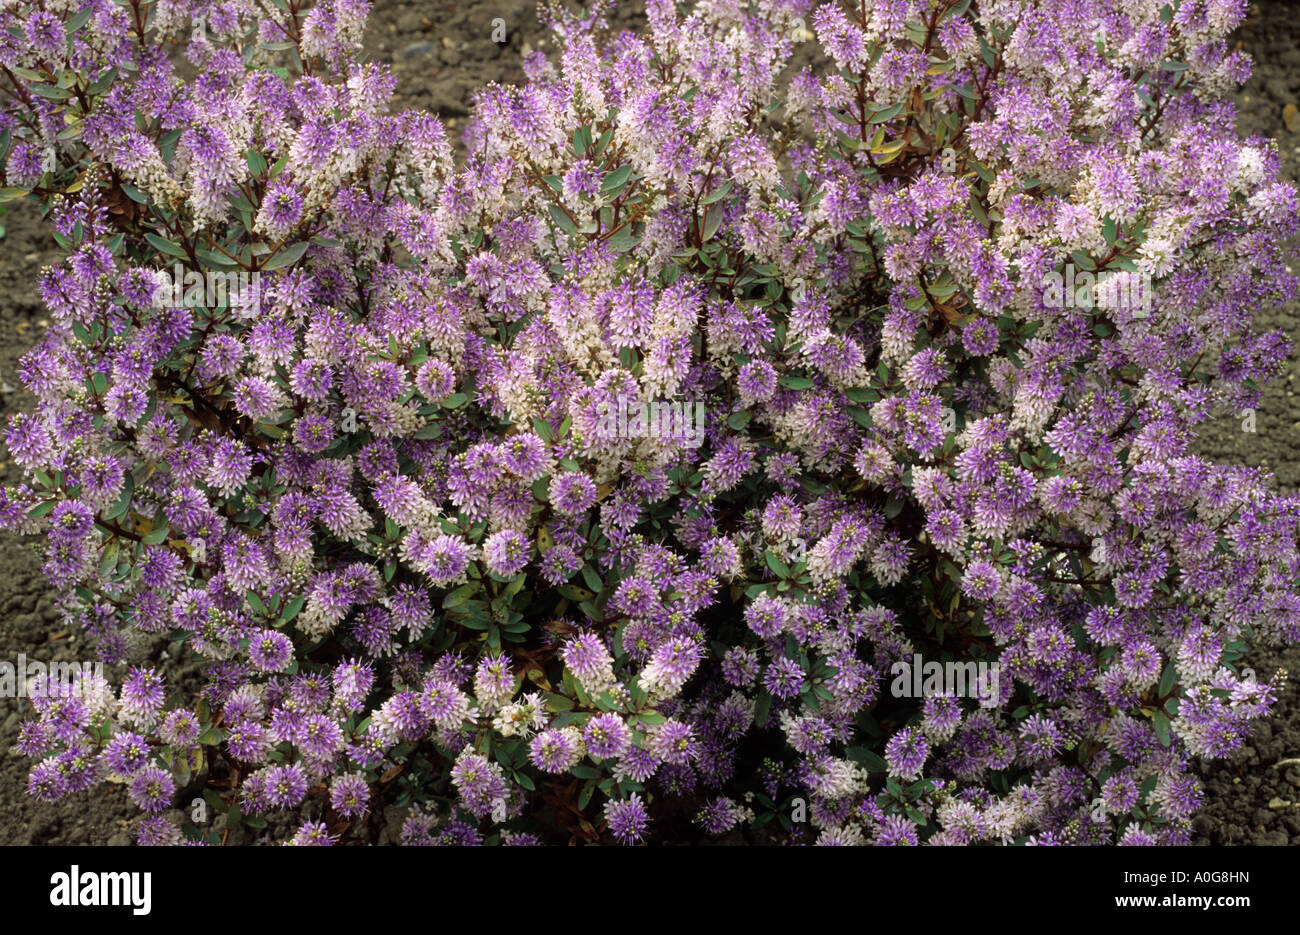 Hebe 'Knightshayes', syn. Hebe 'Caledonia', purple and white flowers, garden plant, Hebes Stock Photo